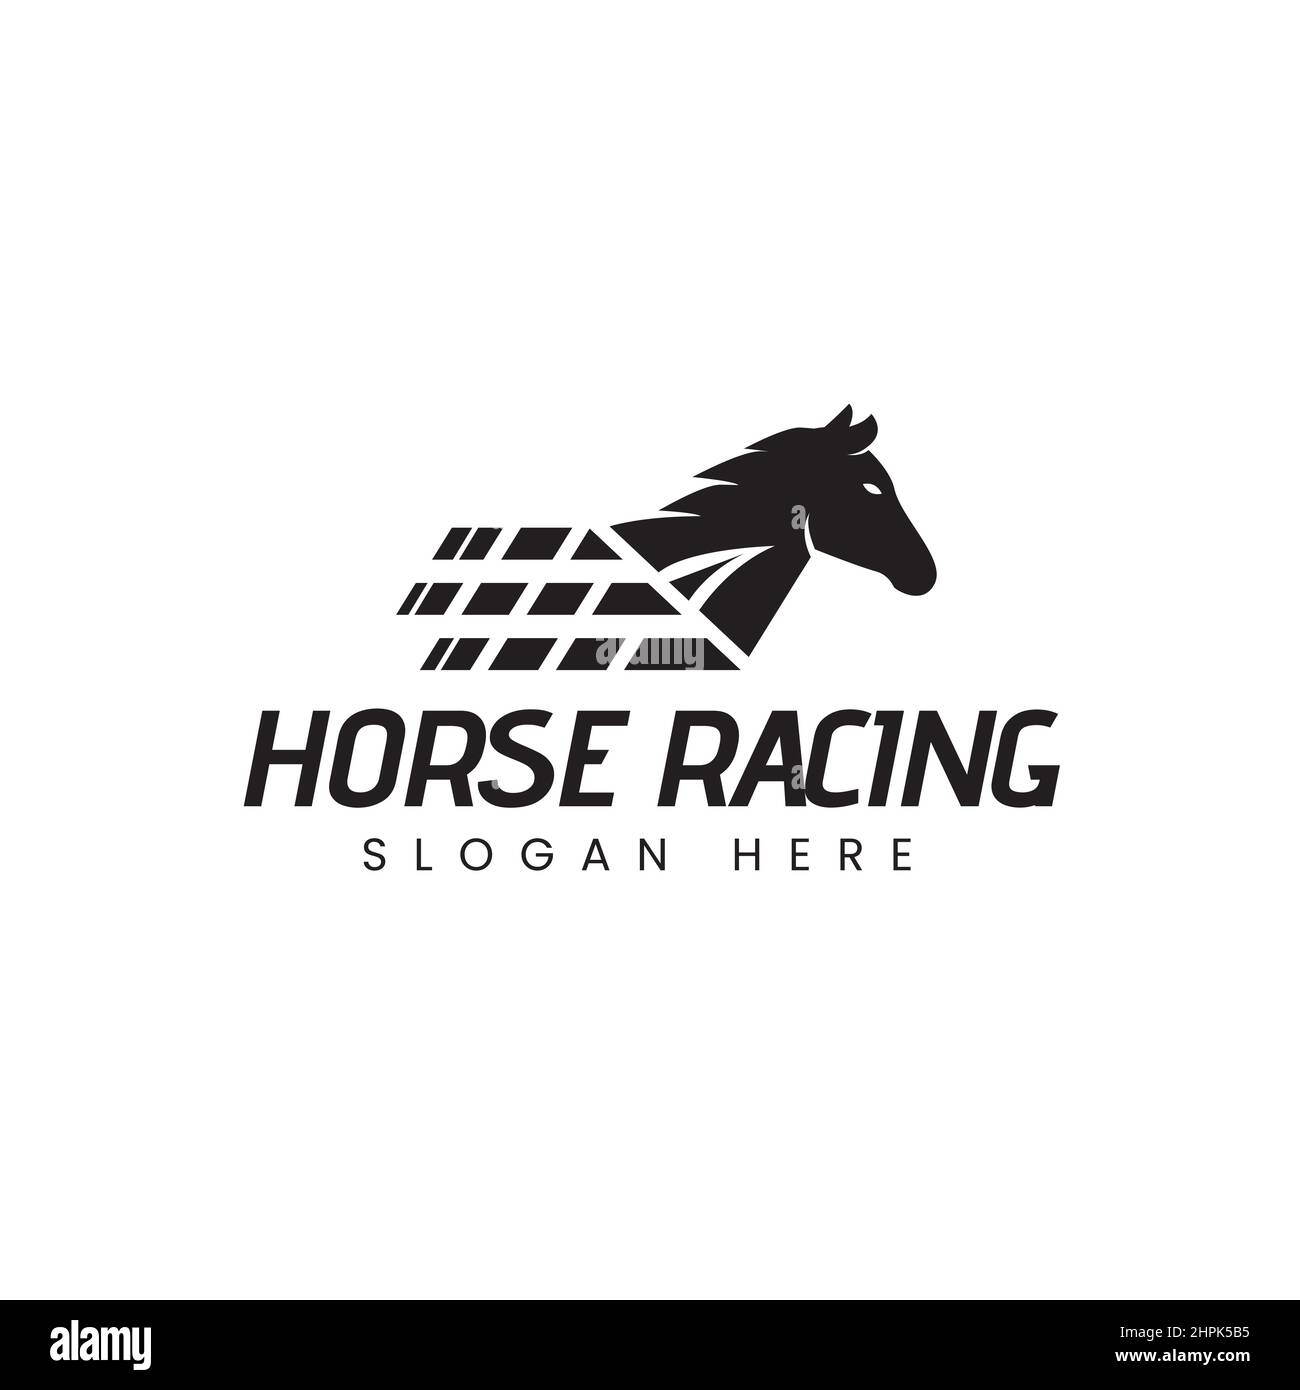 Modern design logos of full speed horse racing, logos of racing clubs, stables and farms, and horse racing events Stock Vector